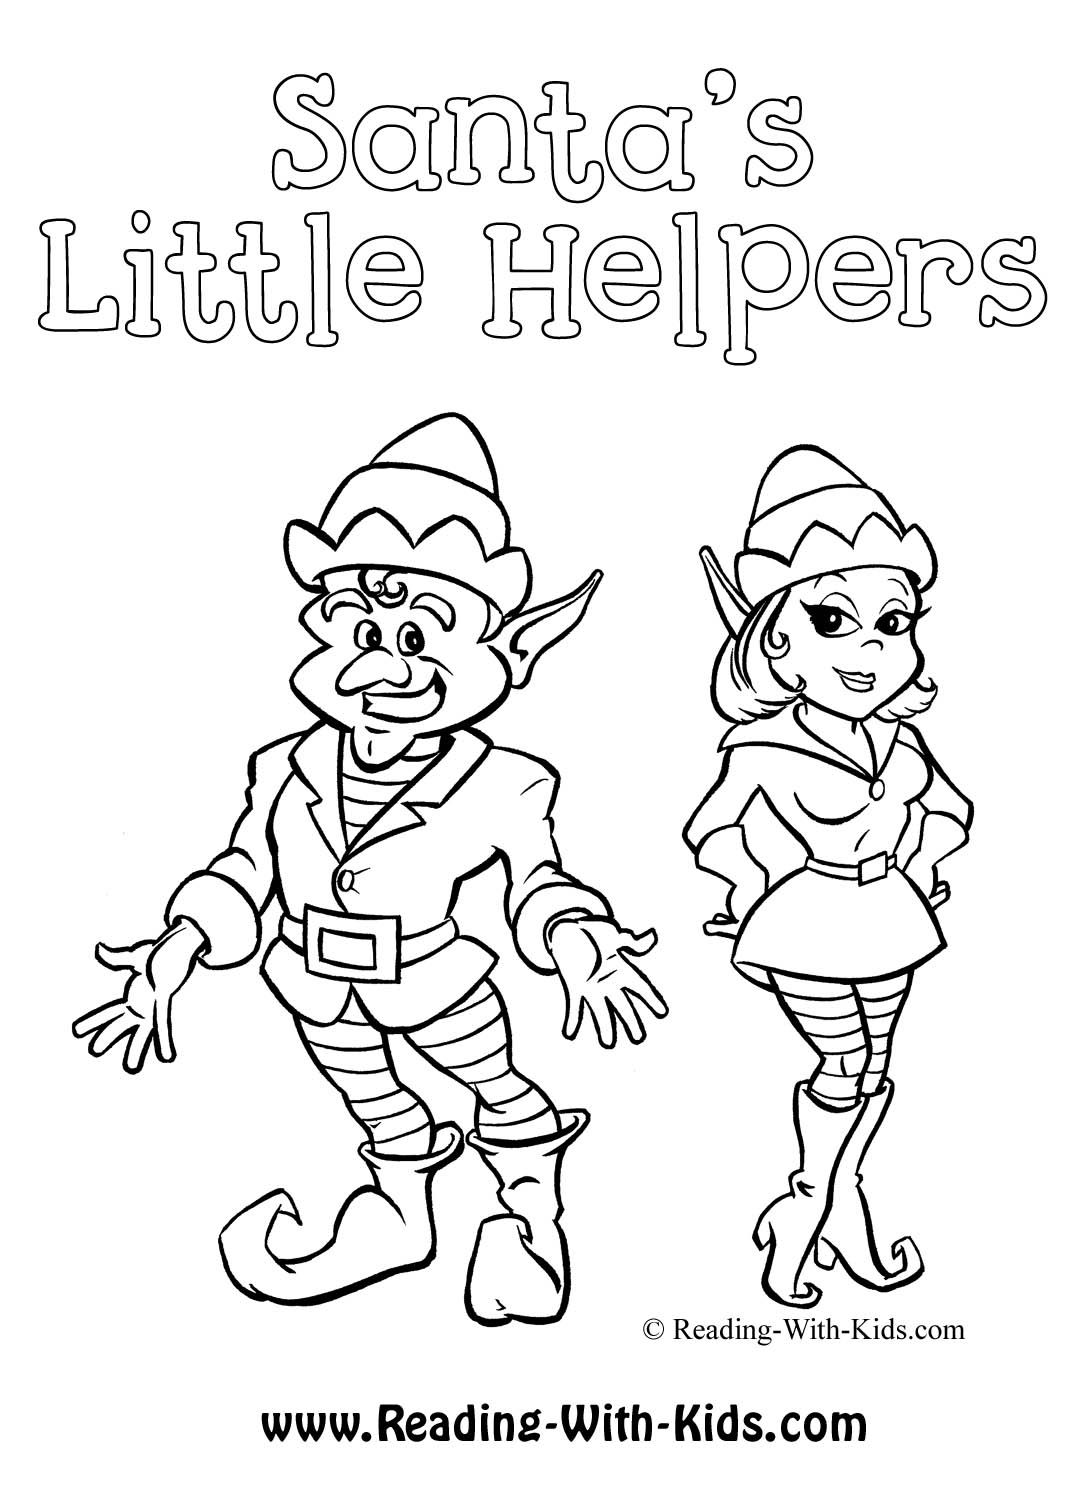 Female Christmas Elf Coloring Pages - High Quality Coloring Pages